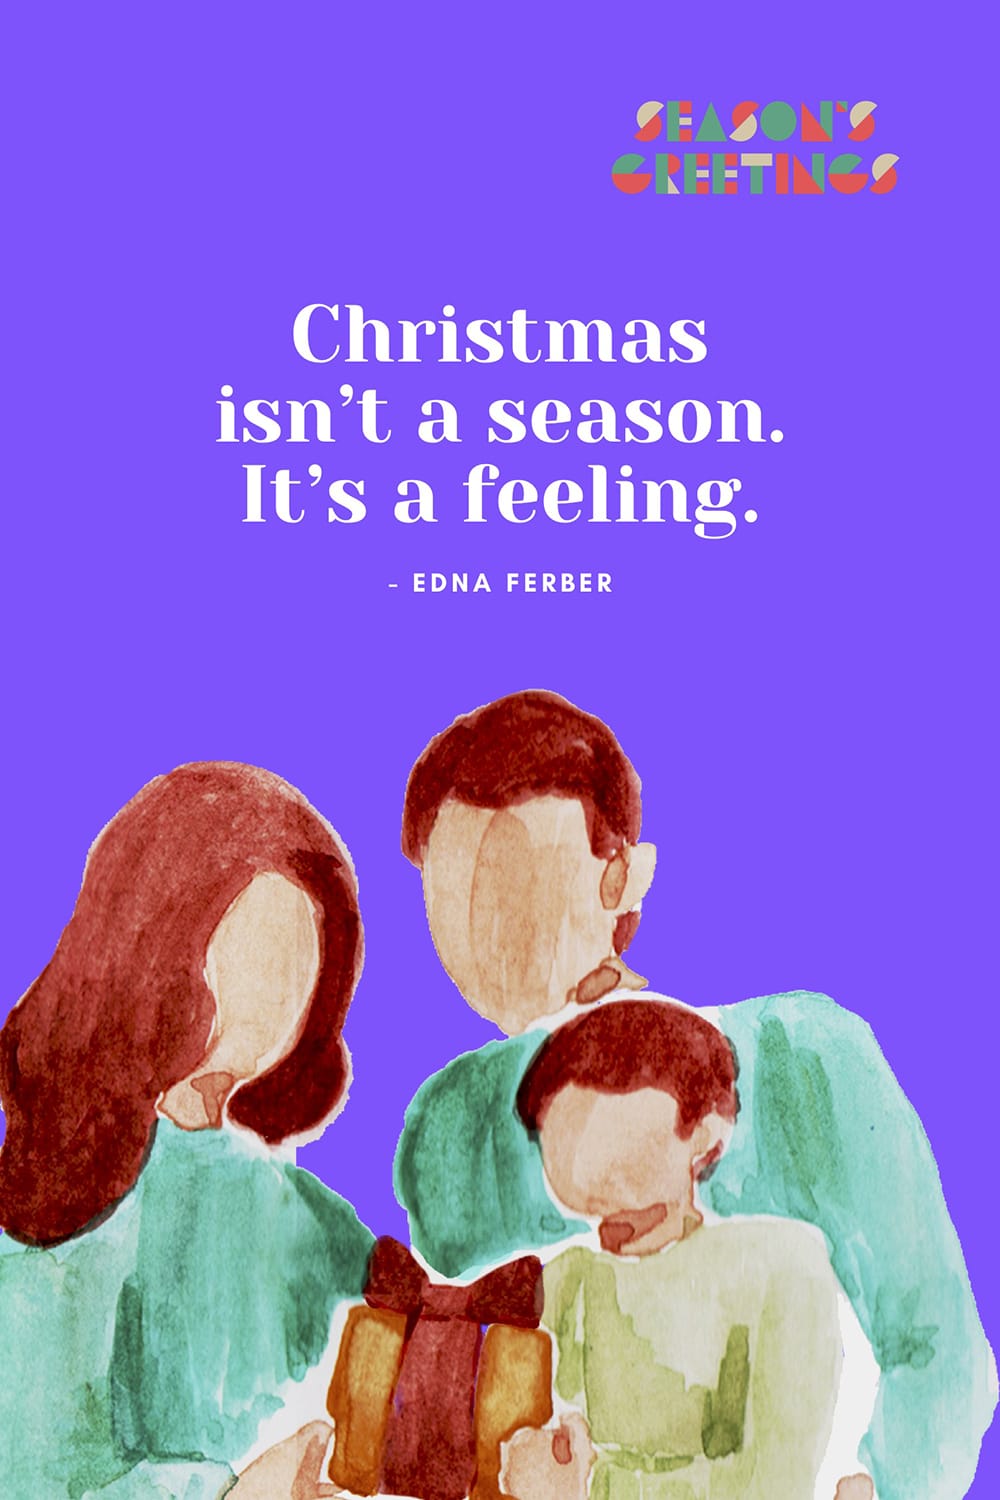 Best short Christmas quotes 22